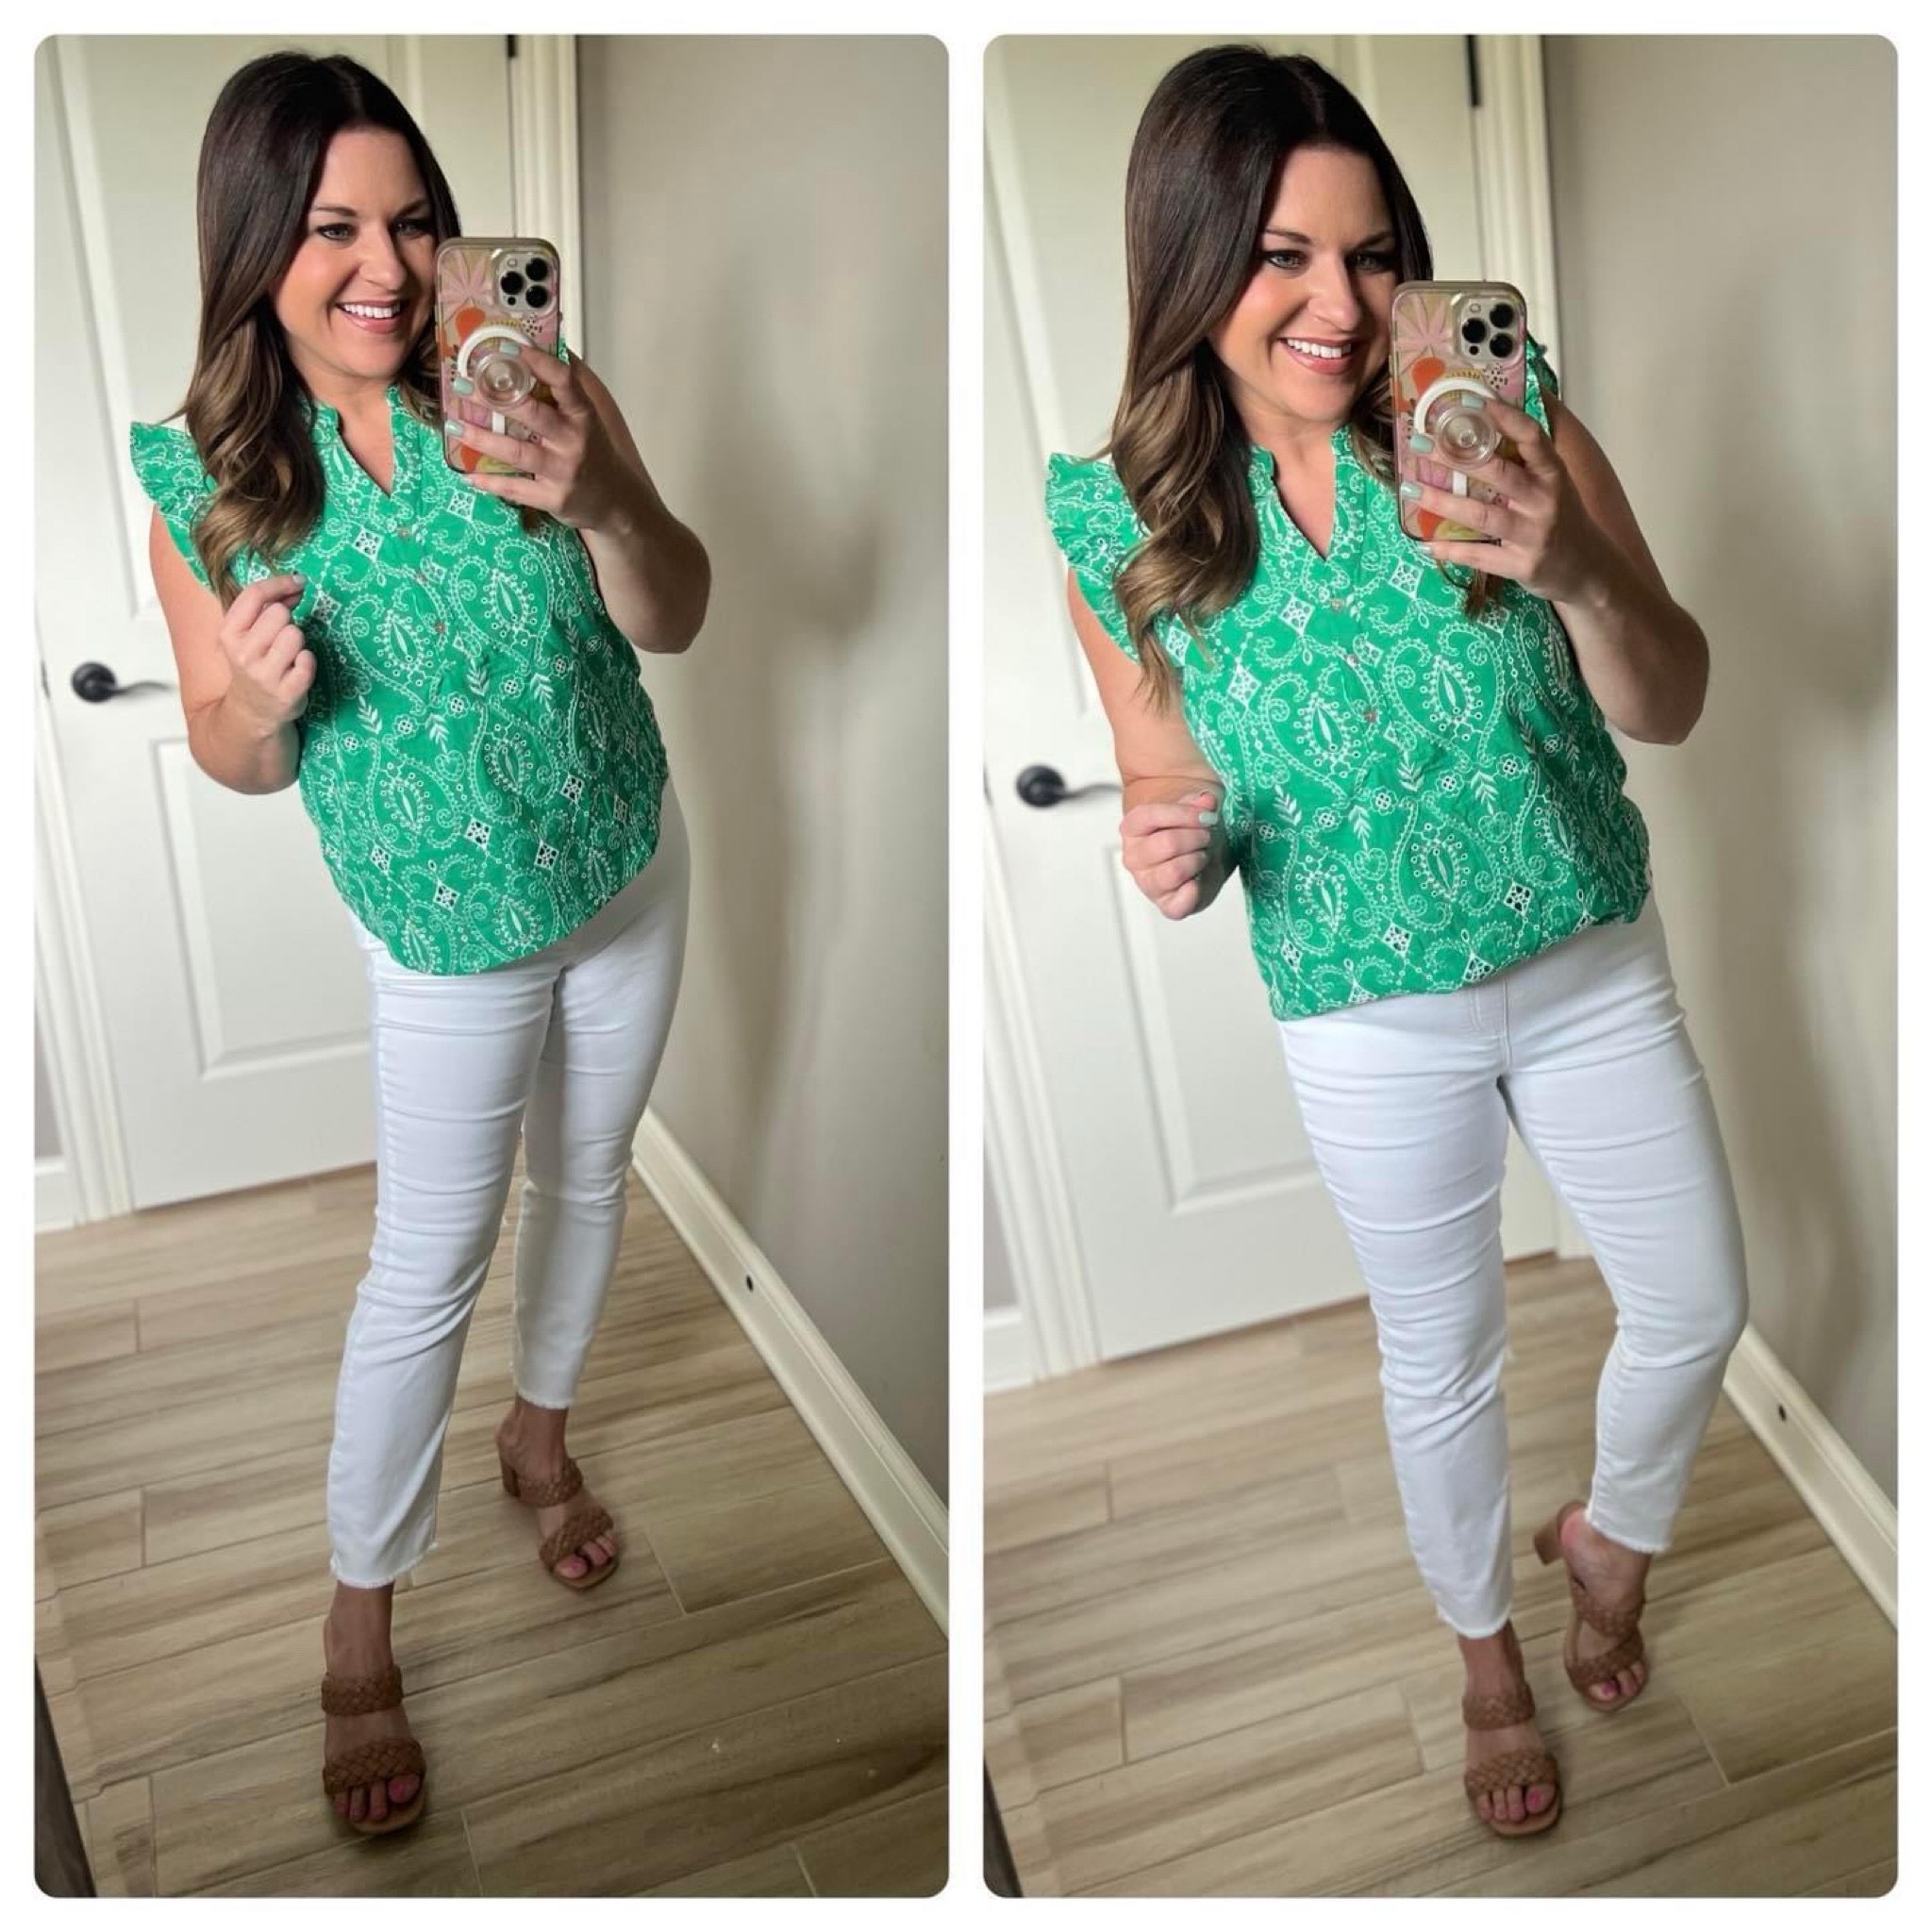 Chic & Comfortable: Spring Fashion for Teachers

spring, spring fashion, spring outfit, white denim jeans, green blouse, casual outfit, casual workwear